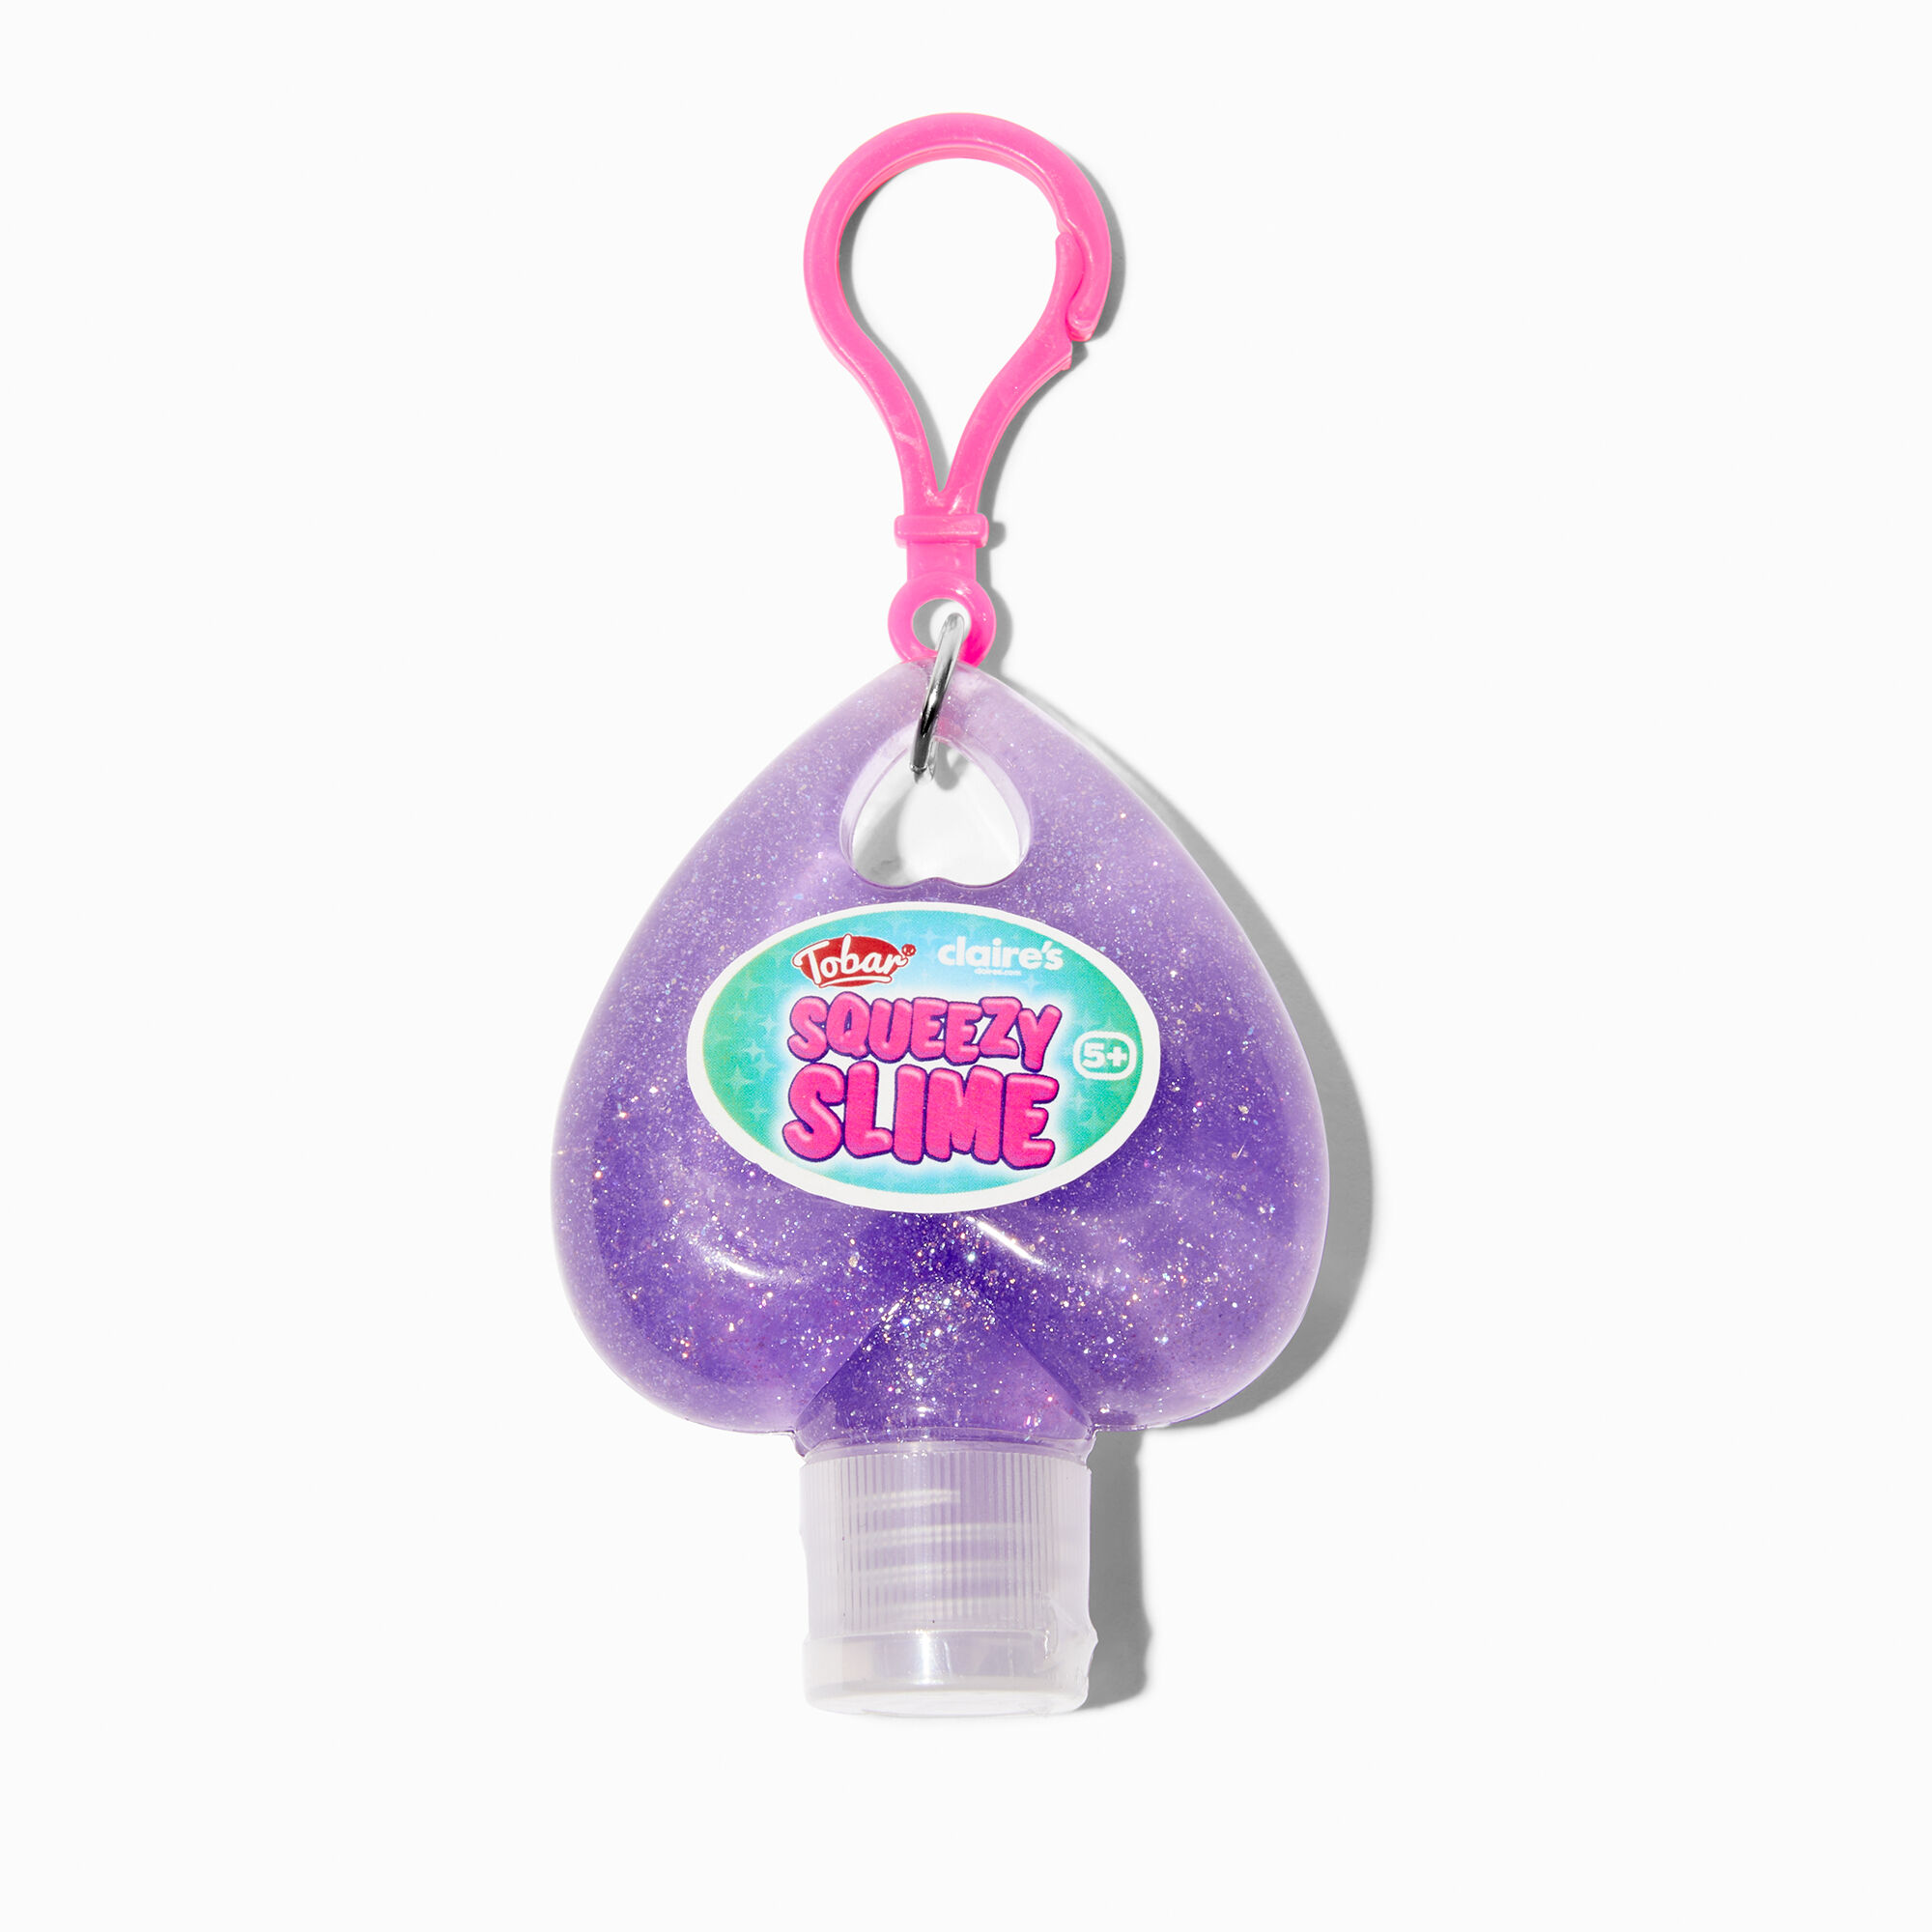 View Claires Exclusive Sparkly Squeezy Slime Keyring Styles Vary information